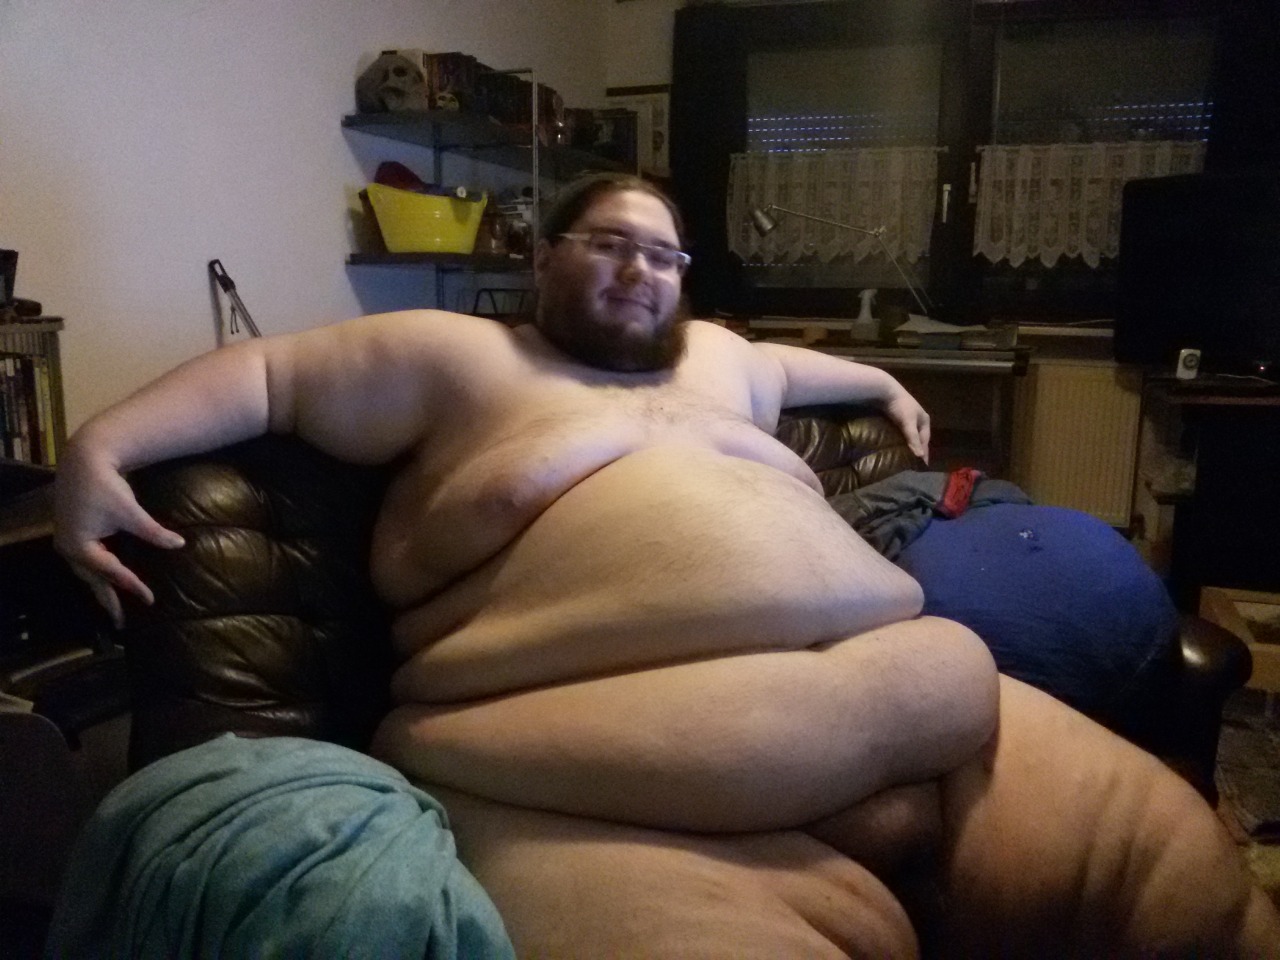 My girlfriend said i shoud show my current weight gain results. My biggest fat roll